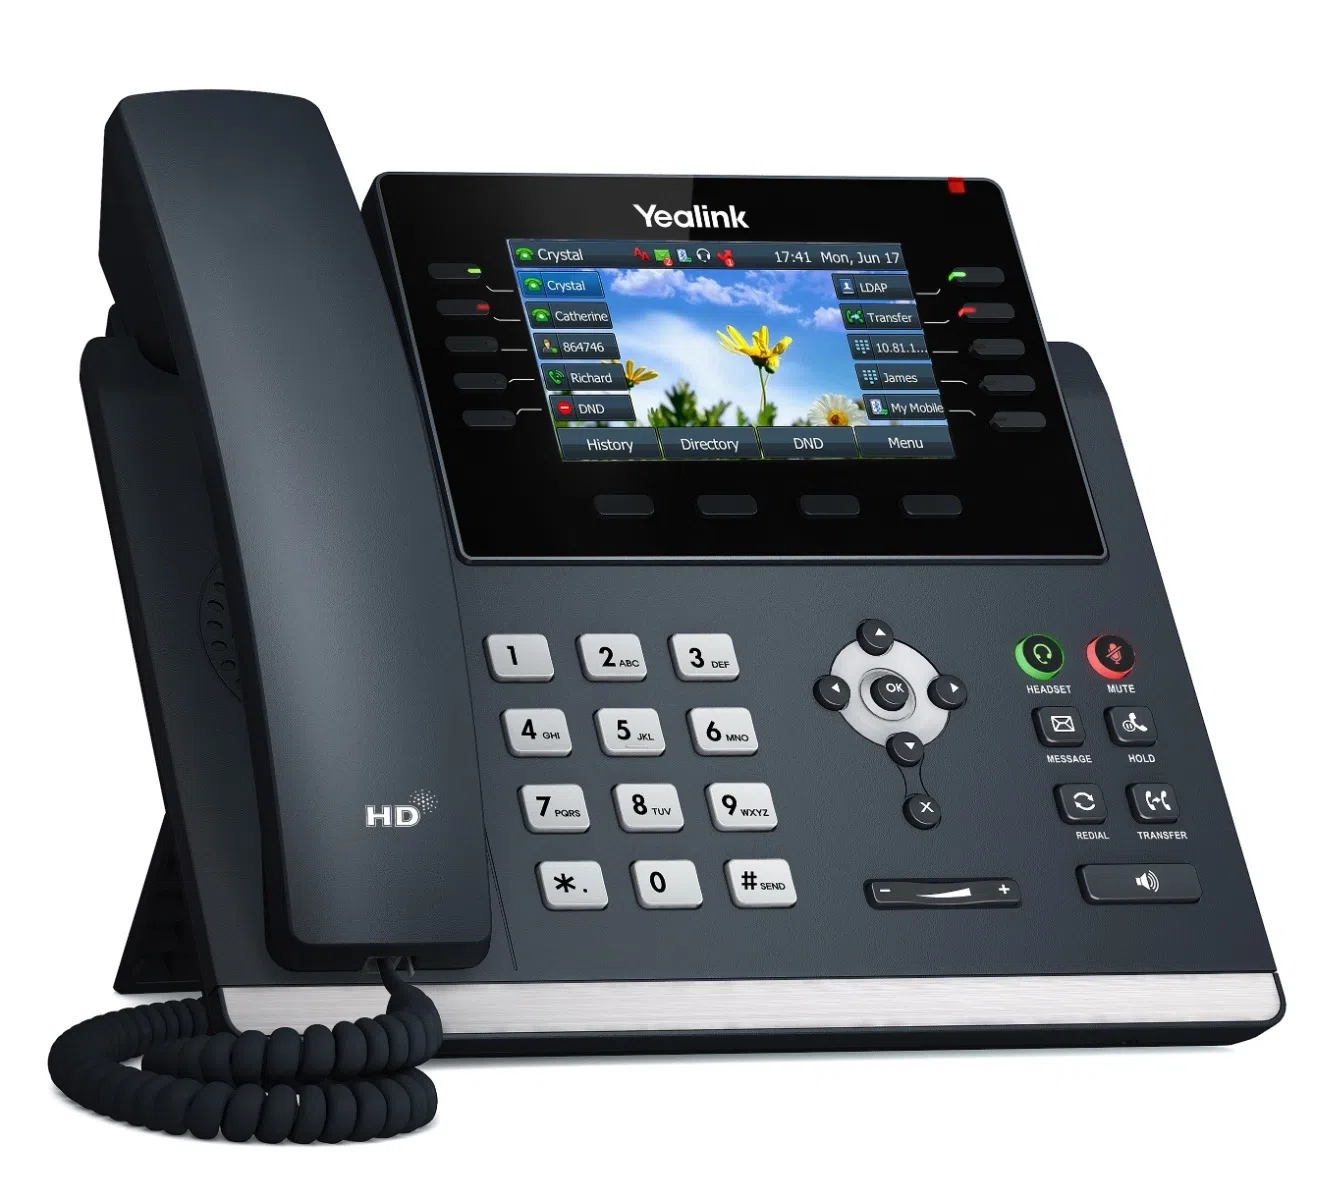 Can you provide the UPC for the Yealink T46U IP Phone 1301203?